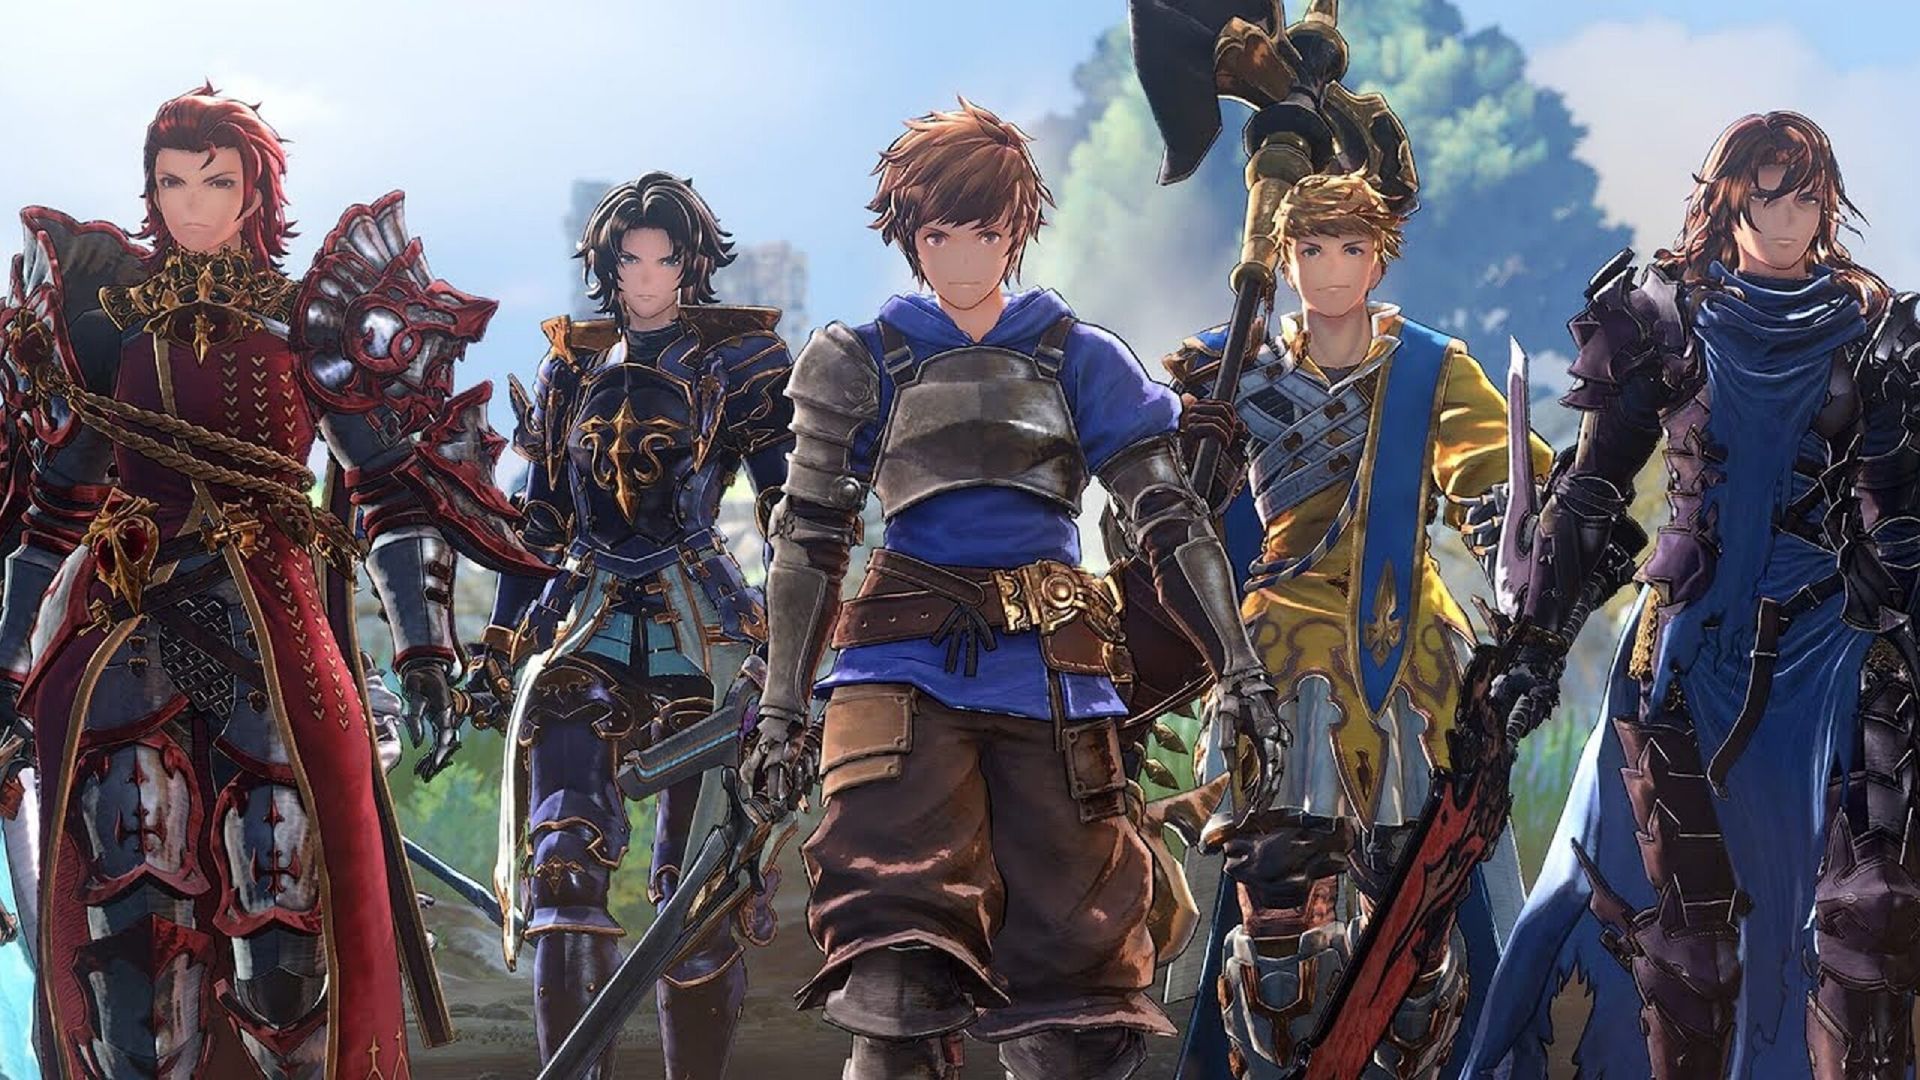 All Playable Characters in Granblue Fantasy: Relink